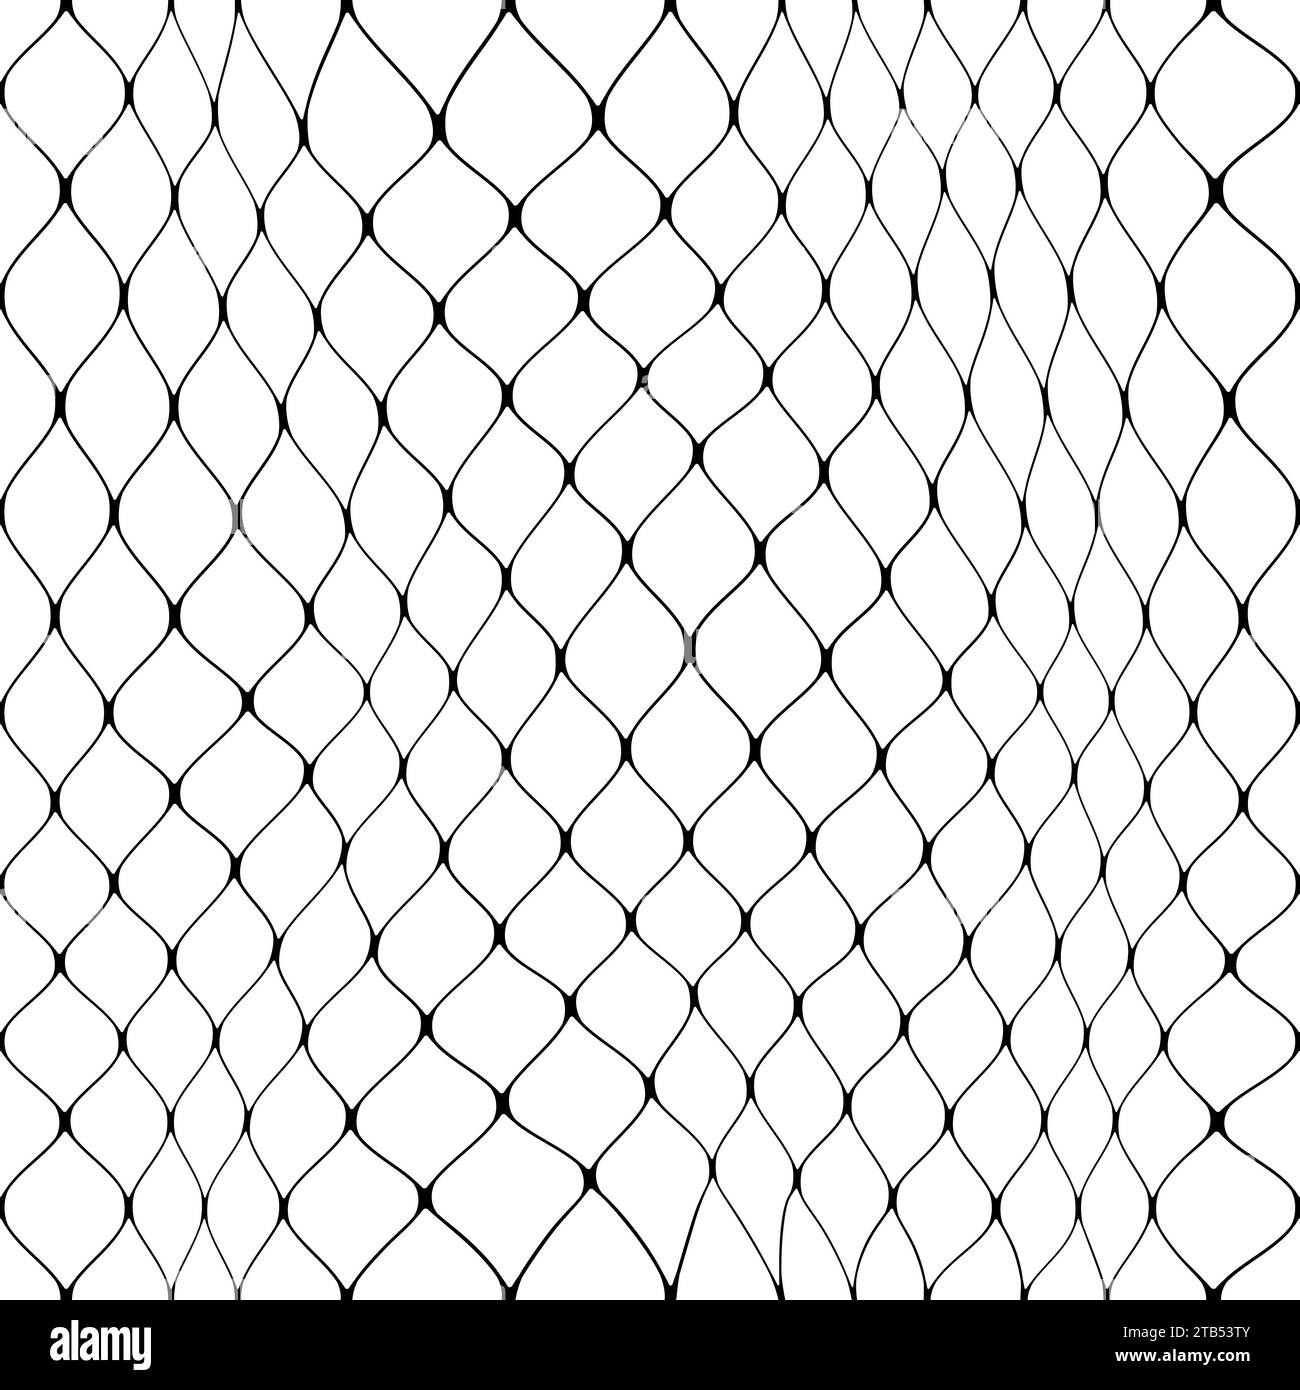 Fish net seamless pattern or fishnet background with mesh grid of